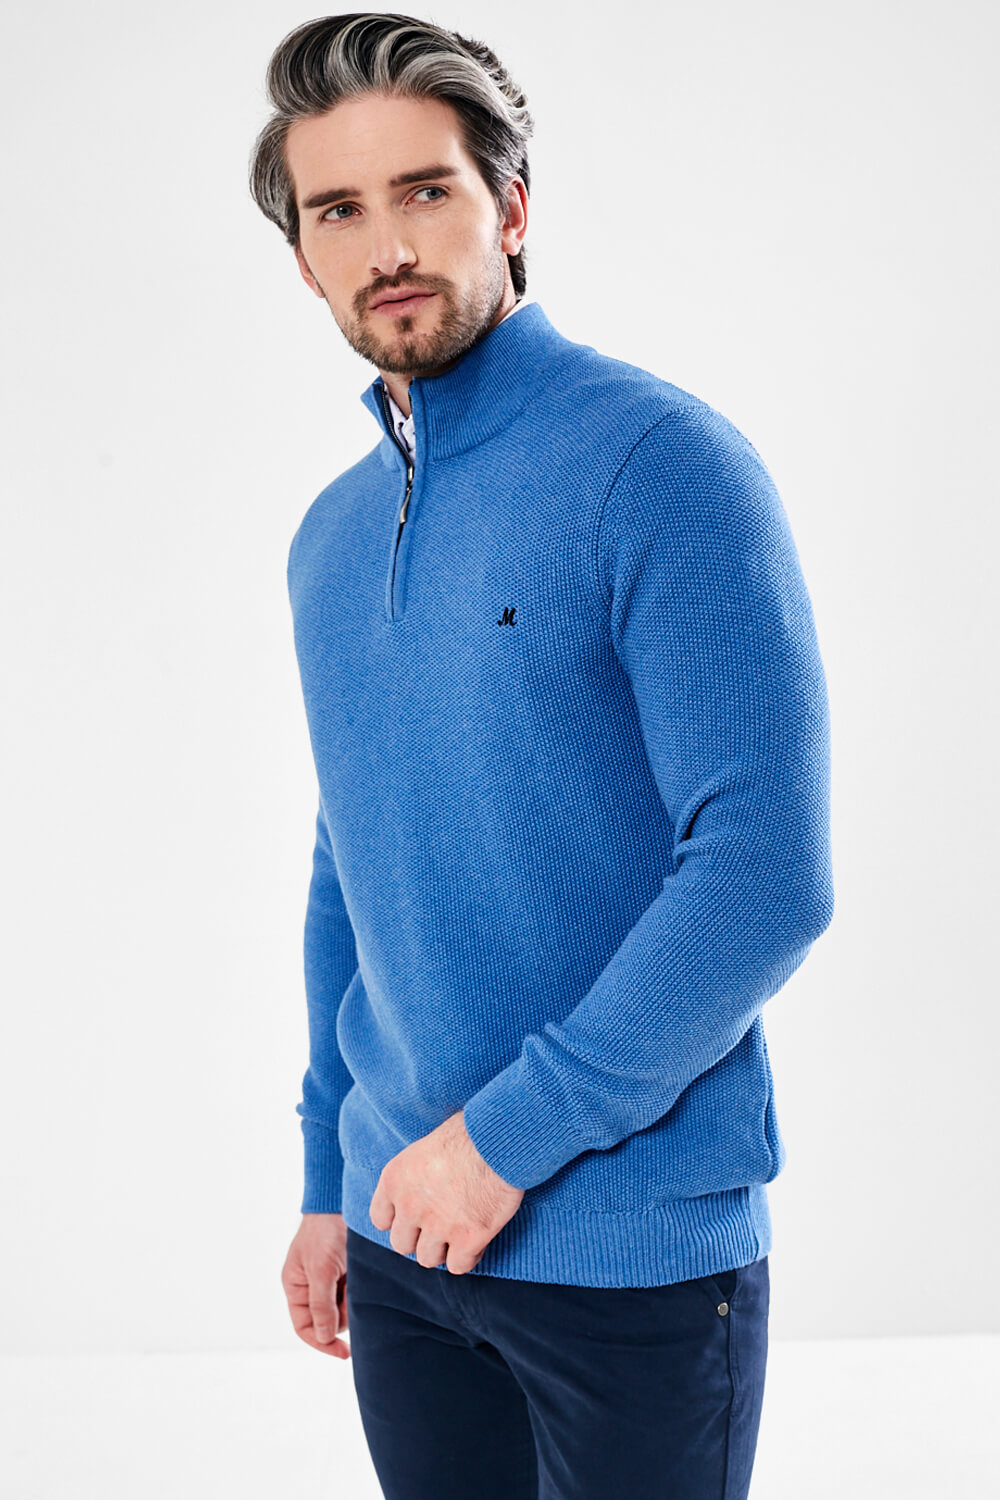 Mineral Kerry Half Zip Knit Jumper in Mid Blue | iCLOTHING - iCLOTHING